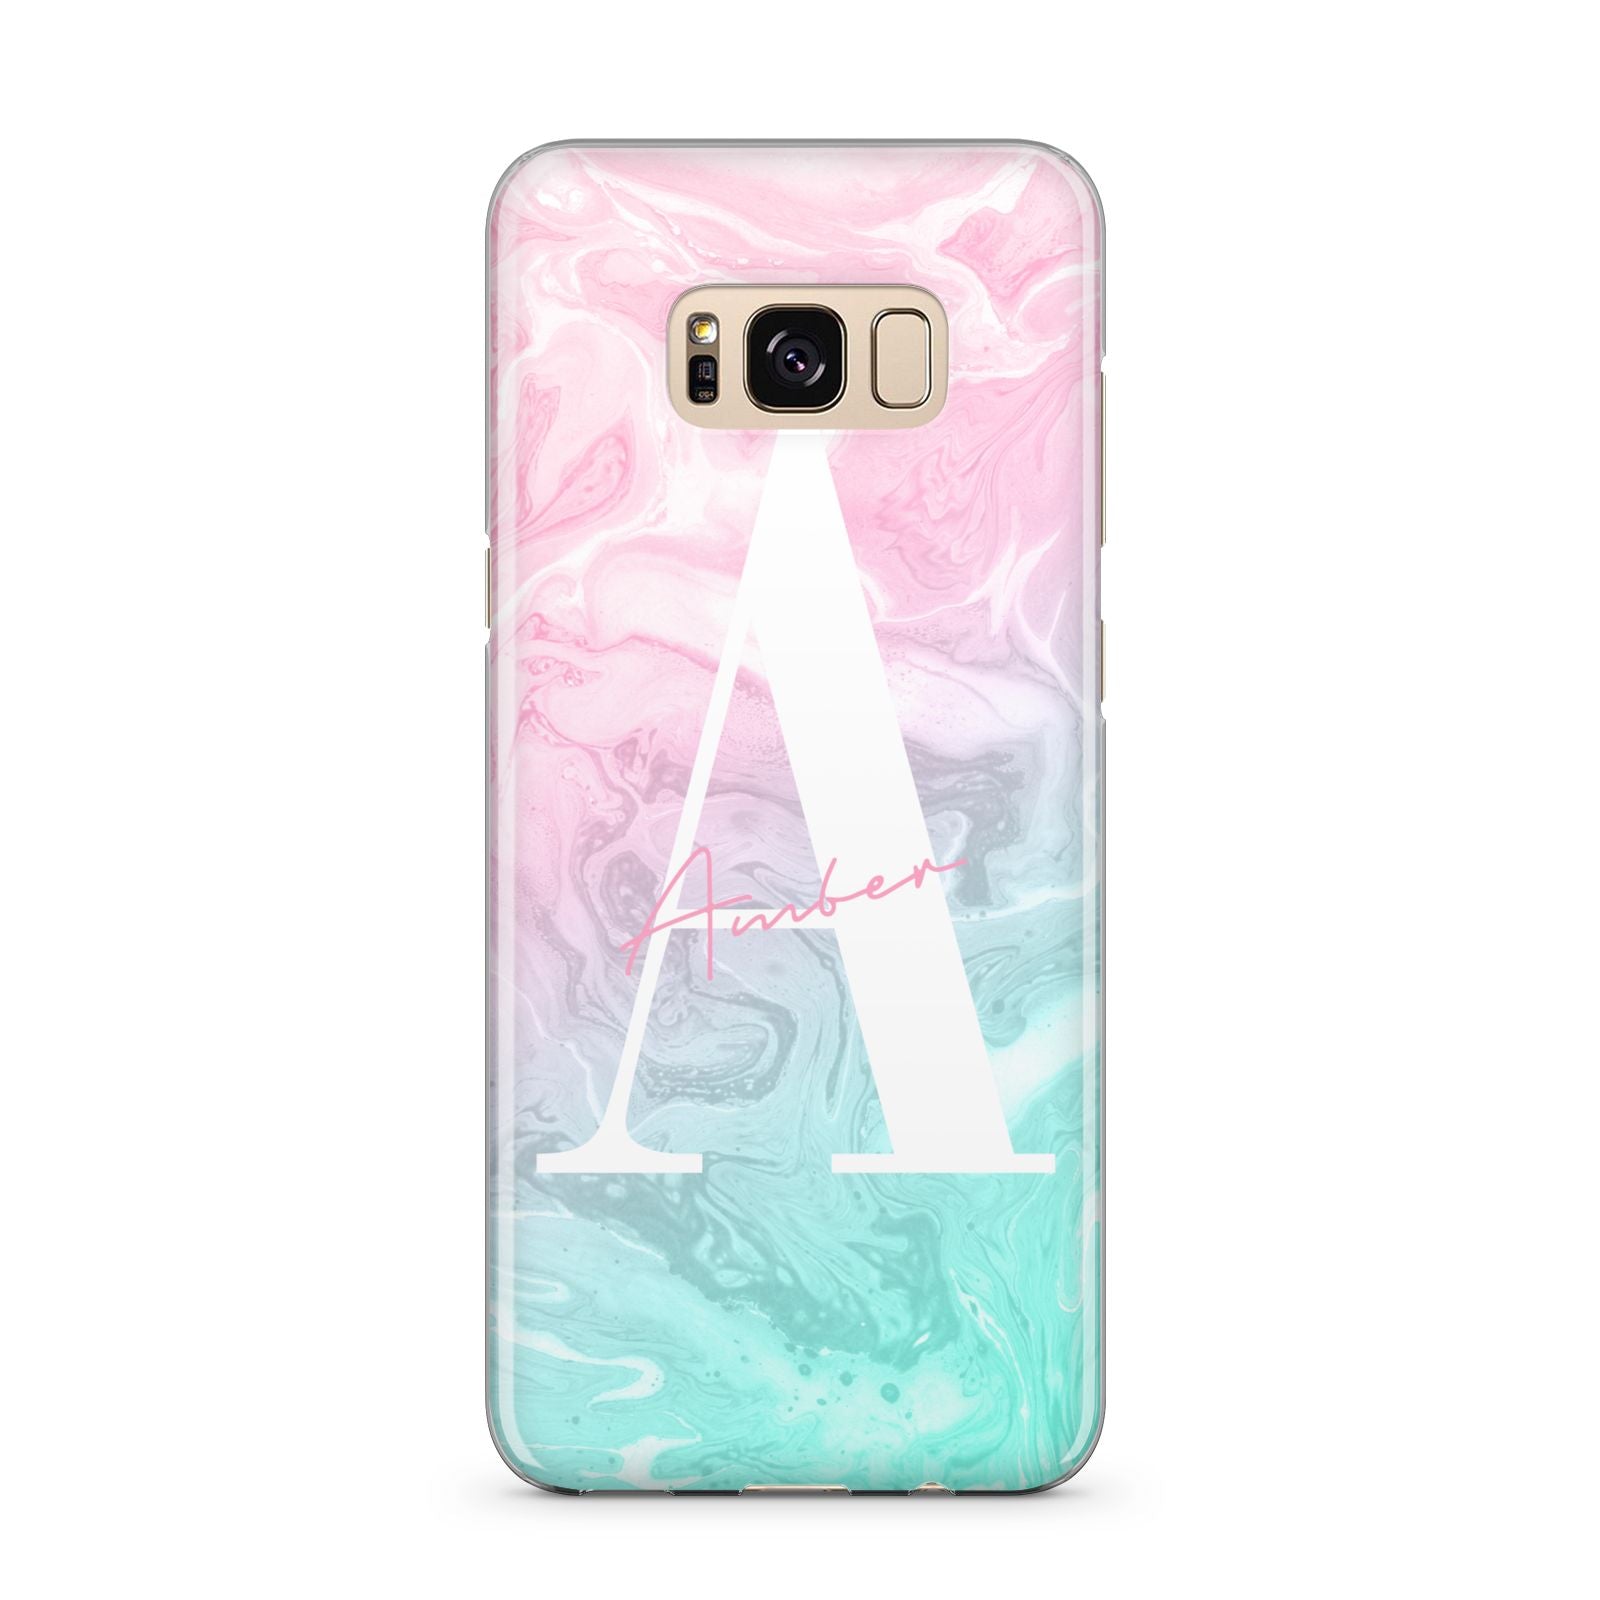 Monogrammed Pink Turquoise Pastel Marble Samsung Galaxy S8 Plus Case